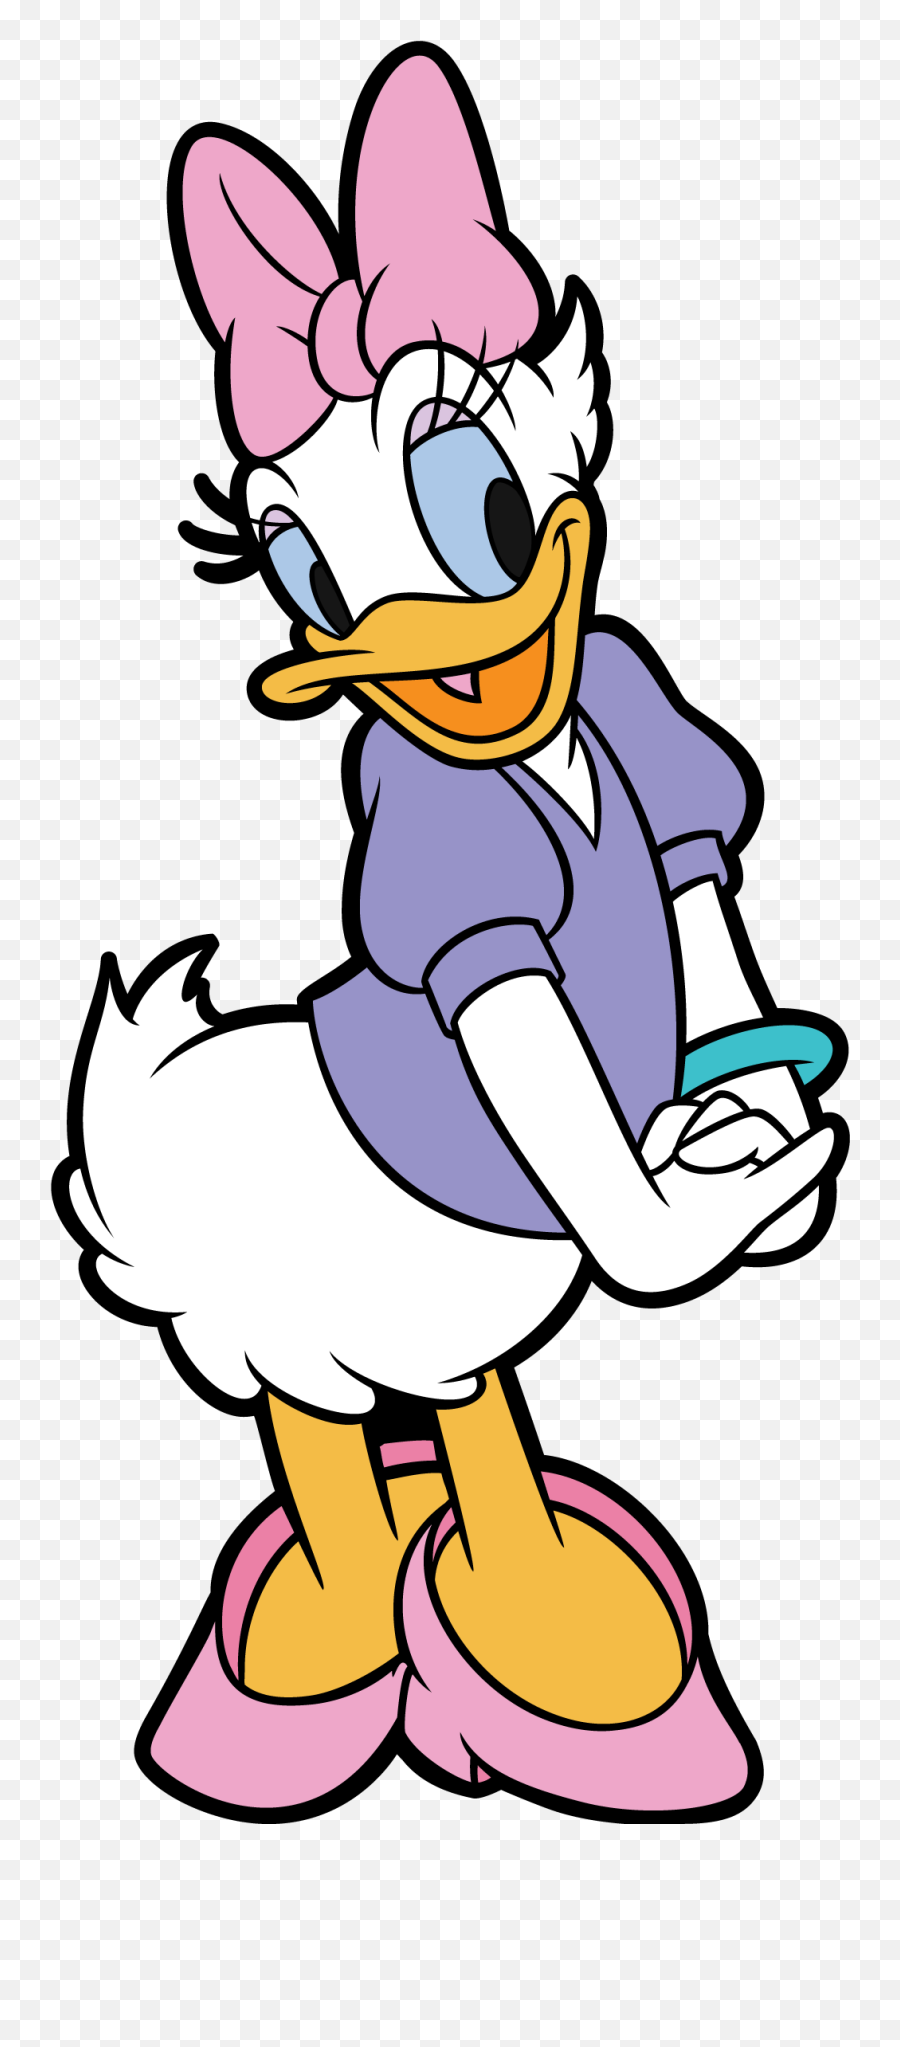 Images 1 2 - Daisy Duck Clipart Emoji,Duck Clipart